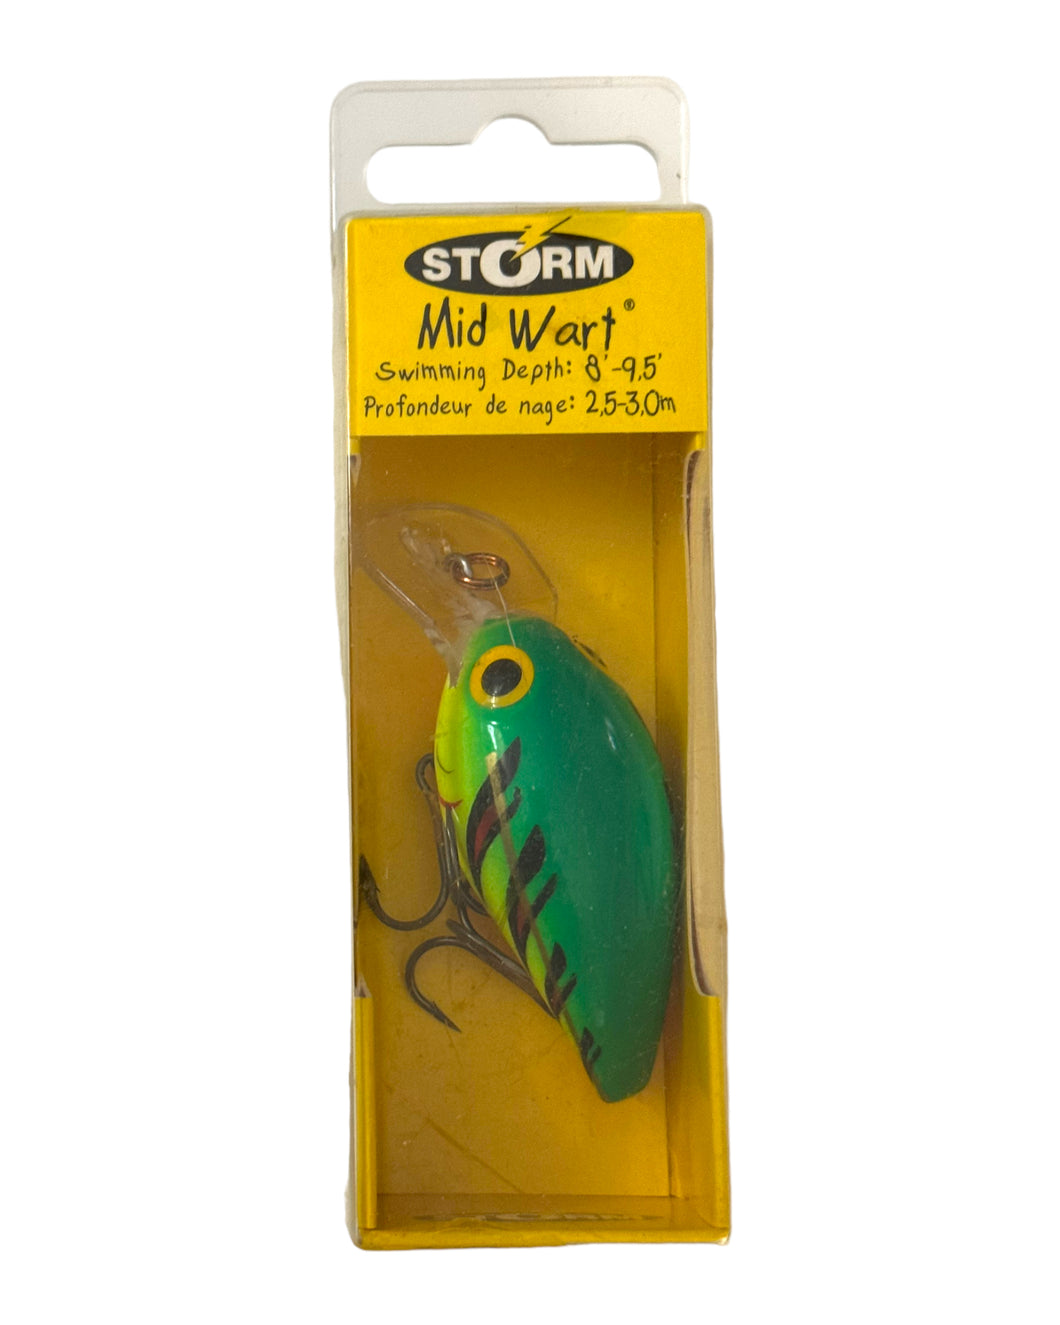 STORM LURES MID WART Size 5 Fishing Lure in HOT TIGER